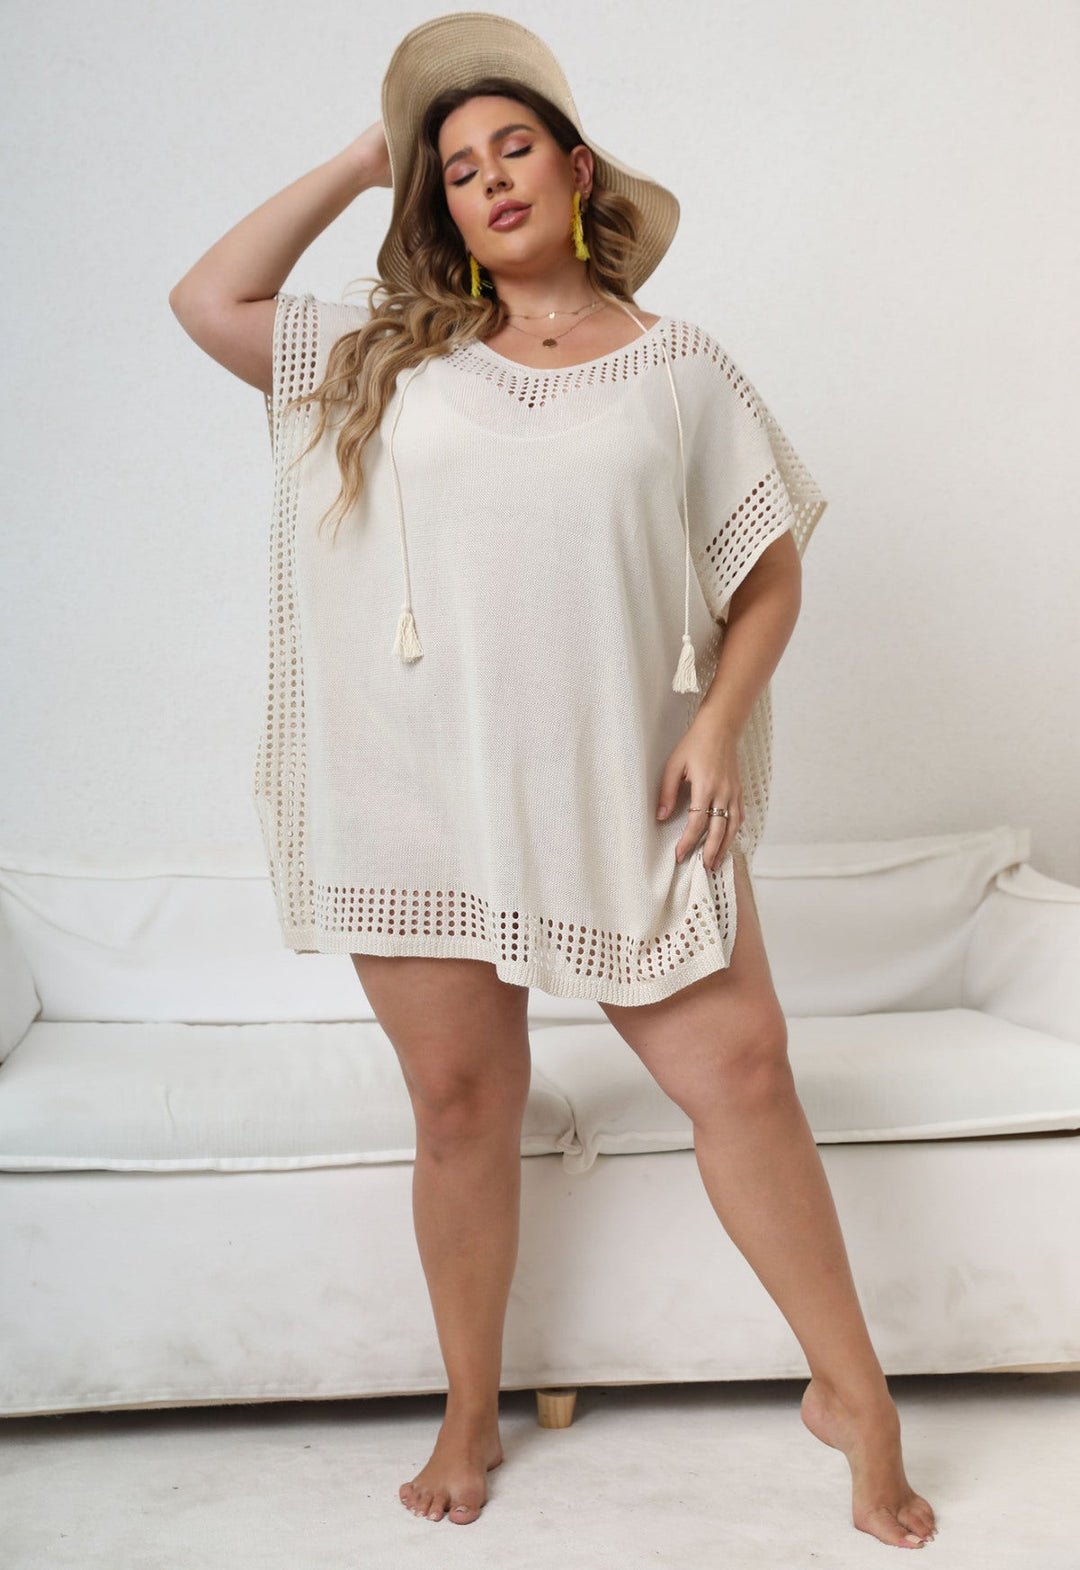 Plus Size Solid Color Openwork Cover Up with Tassels